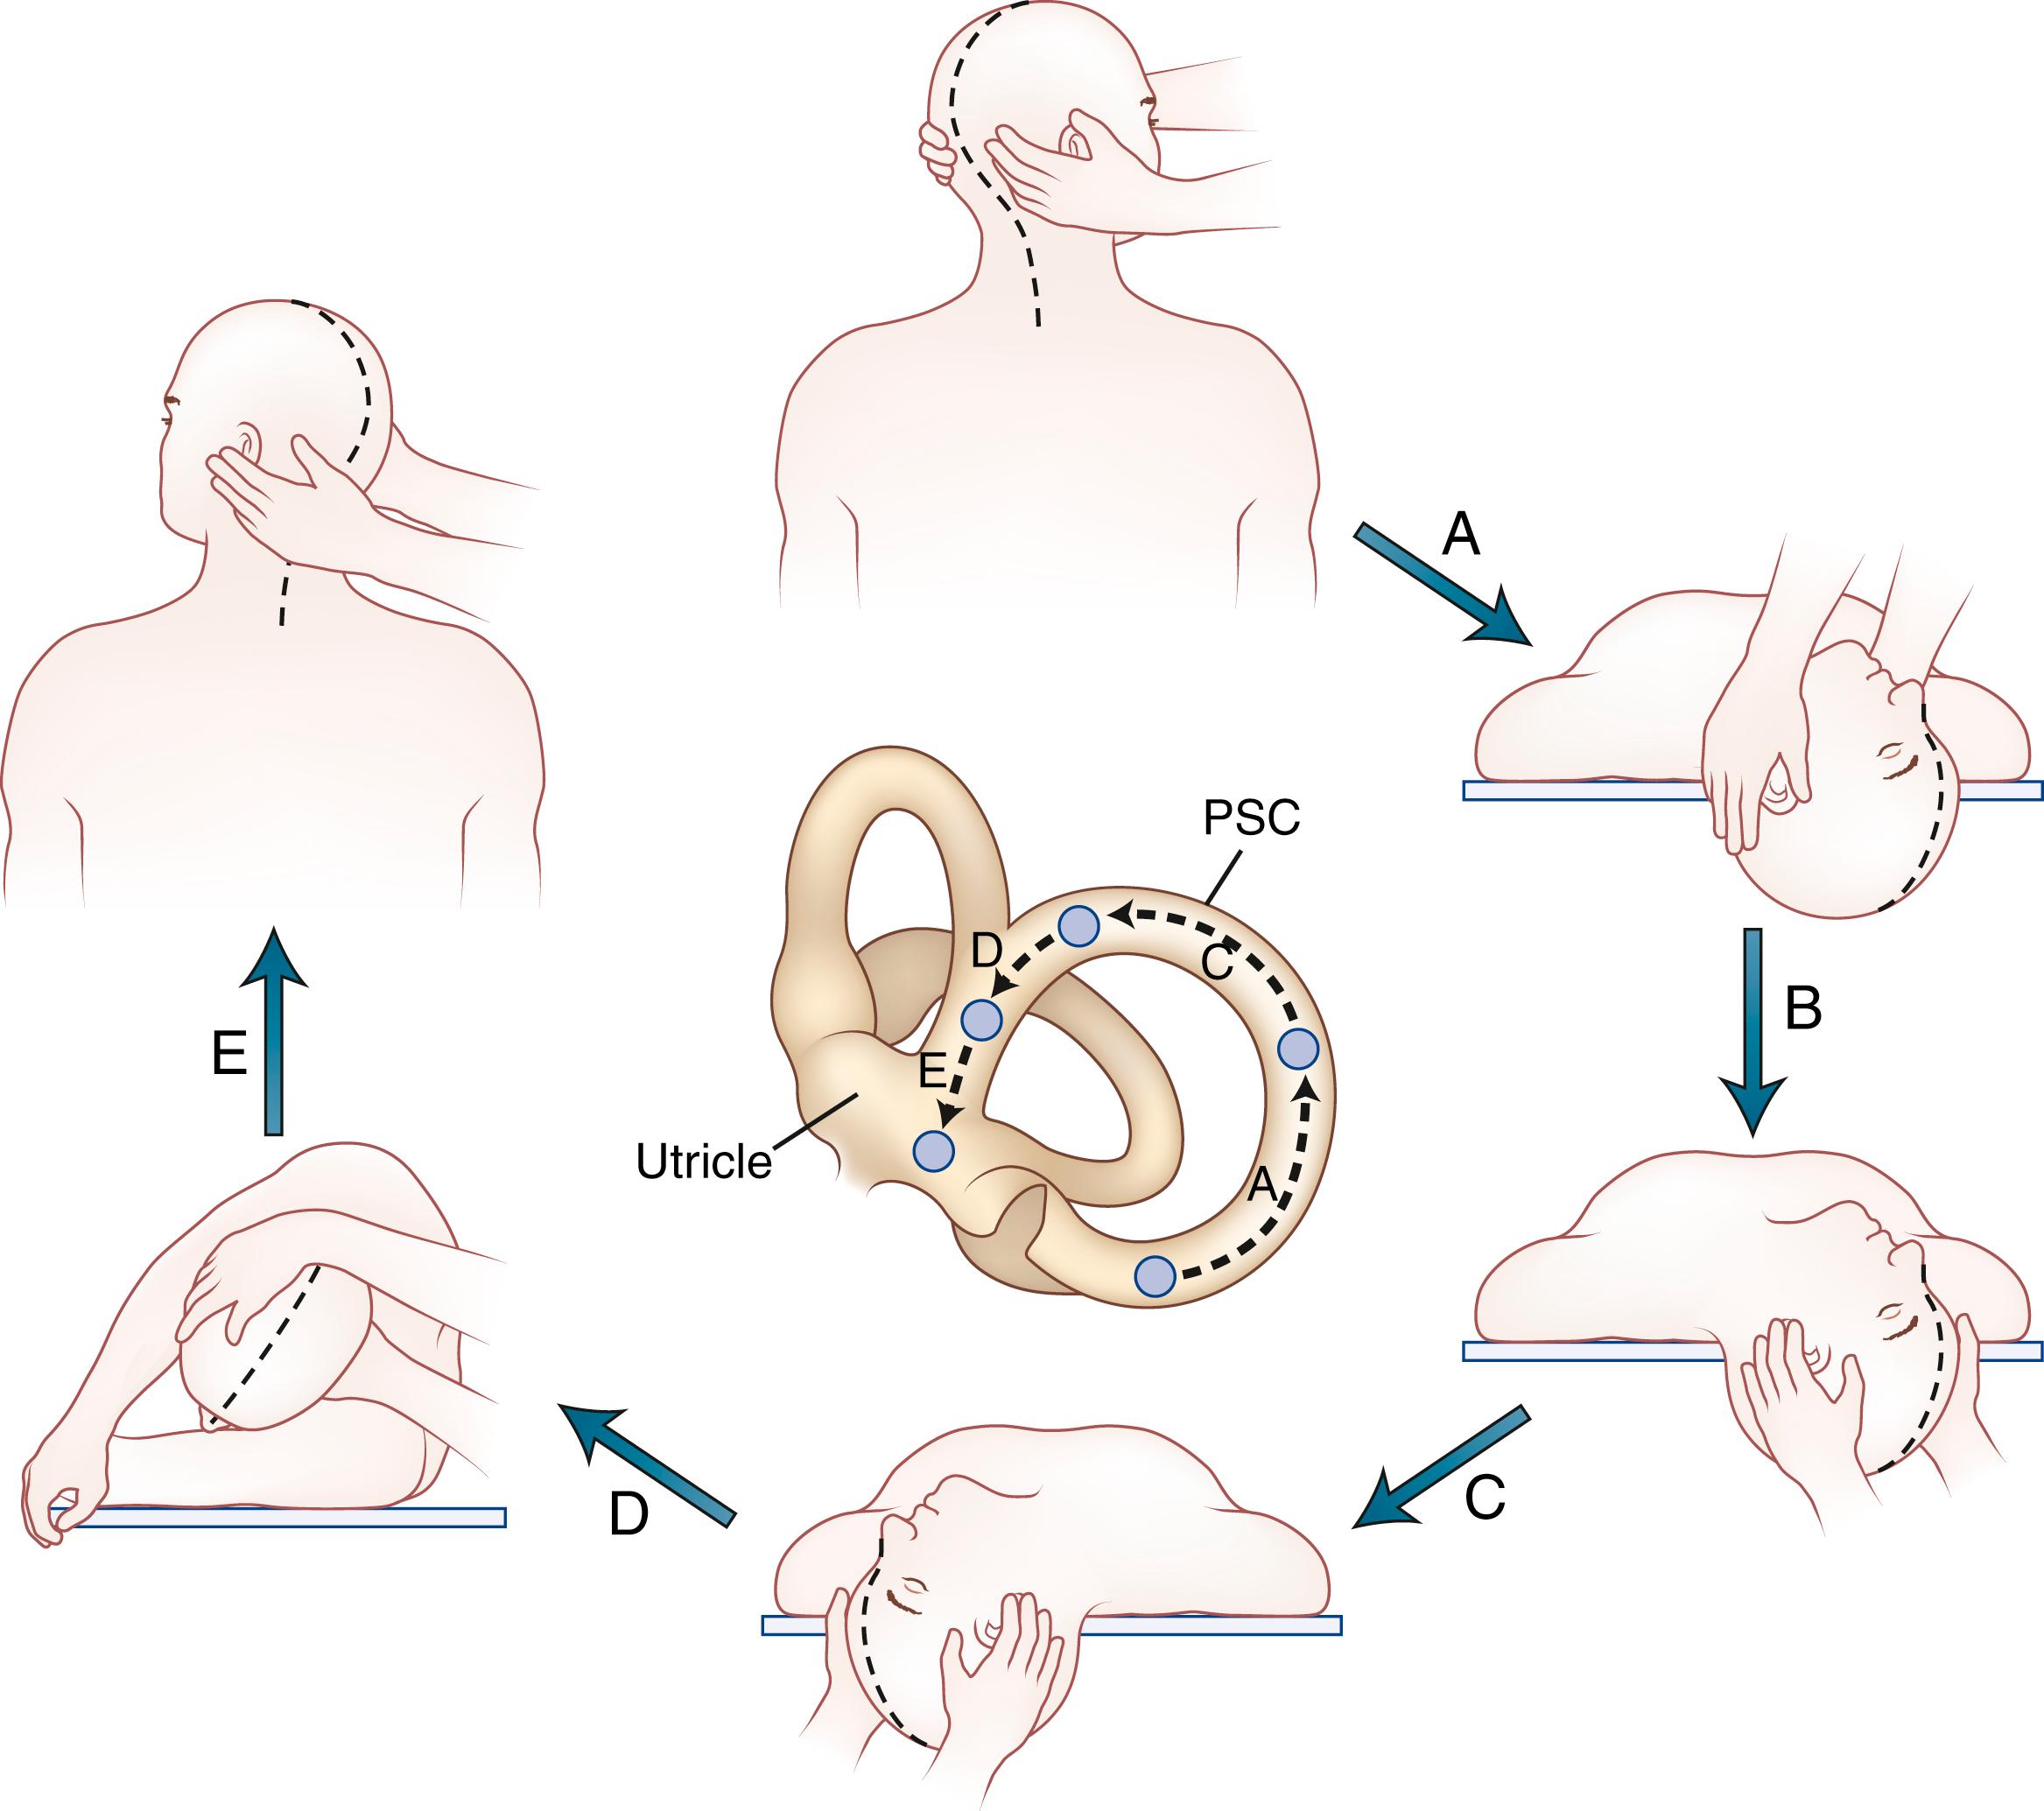 Fig. 22.4, Treatment Maneuver For Benign Paroxysmal Positional Vertigo Affecting the Right Ear. Procedure can be reversed for treating the left ear. Drawing of labyrinth in the center shows position of the debris as it moves around the posterior semicircular canal (PSC) and into the utricle. A, Patient is seated upright with head facing examiner, who is standing on the right. B, Patient is then rapidly moved to head-hanging right position (Dix–Hallpike test). This position is maintained until nystagmus ceases. Examiner moves to the head of the table, repositioning hands as shown. C, Patient’s head is rotated quickly to the left, with right ear upward. This position is maintained for 30 seconds. D, Patient rolls onto the left side while examiner rapidly rotates the head leftward until the nose is directed toward the floor. This position is then held for 30 seconds. E, Patient is then rapidly lifted into the sitting position, now facing left. The entire sequence should be repeated until no nystagmus can be elicited. Following the maneuver, the patient is instructed to avoid head-hanging positions to prevent the debris from re-entering the posterior canal.